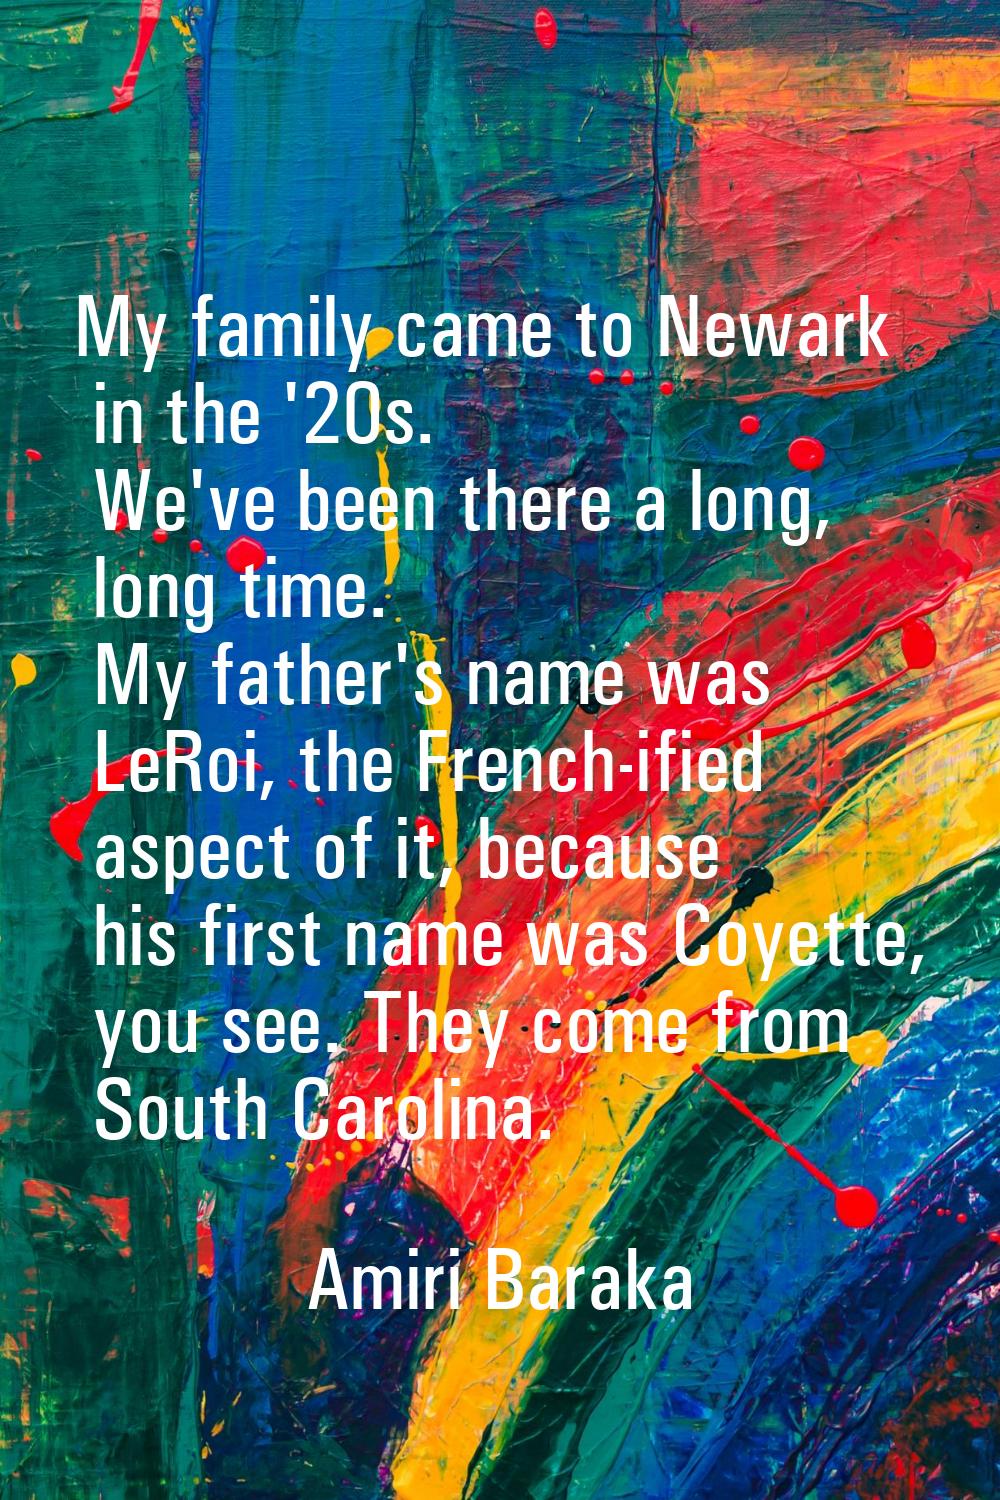 My family came to Newark in the '20s. We've been there a long, long time. My father's name was LeRo